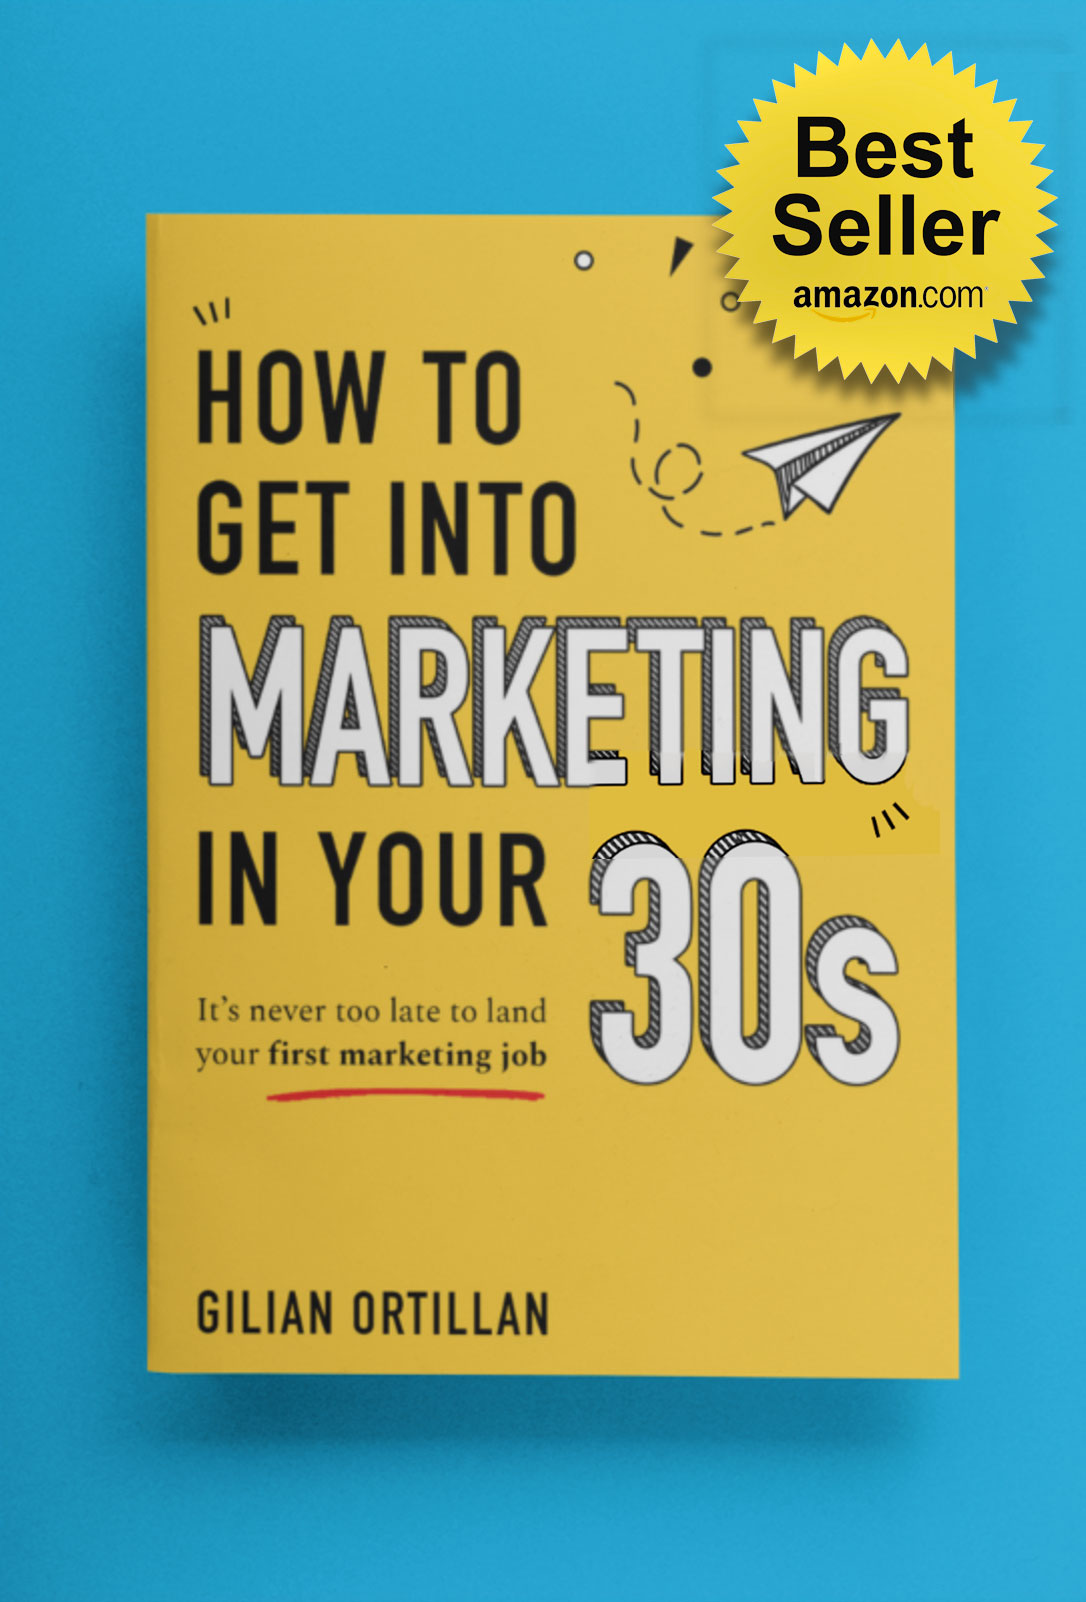 How to Get into Marketing in Your 30s - #1 Best-seller on Amazon in Job Markets & Advice